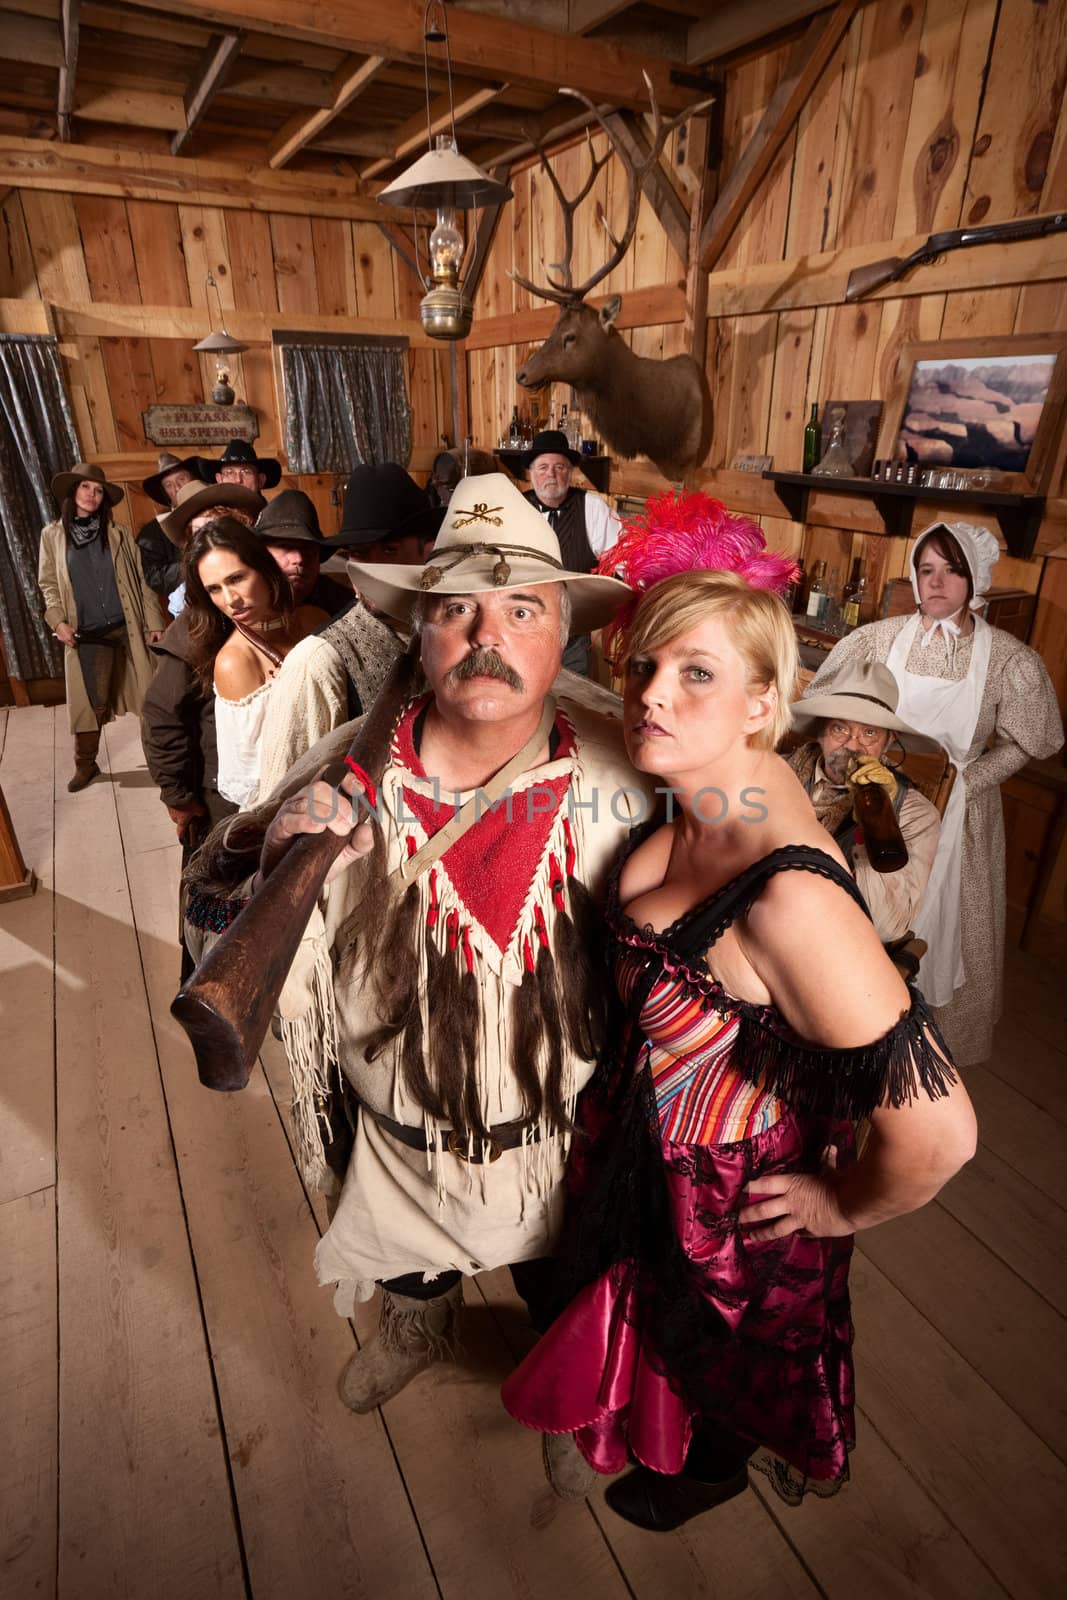 Trapper and Showgirl in Saloon by Creatista